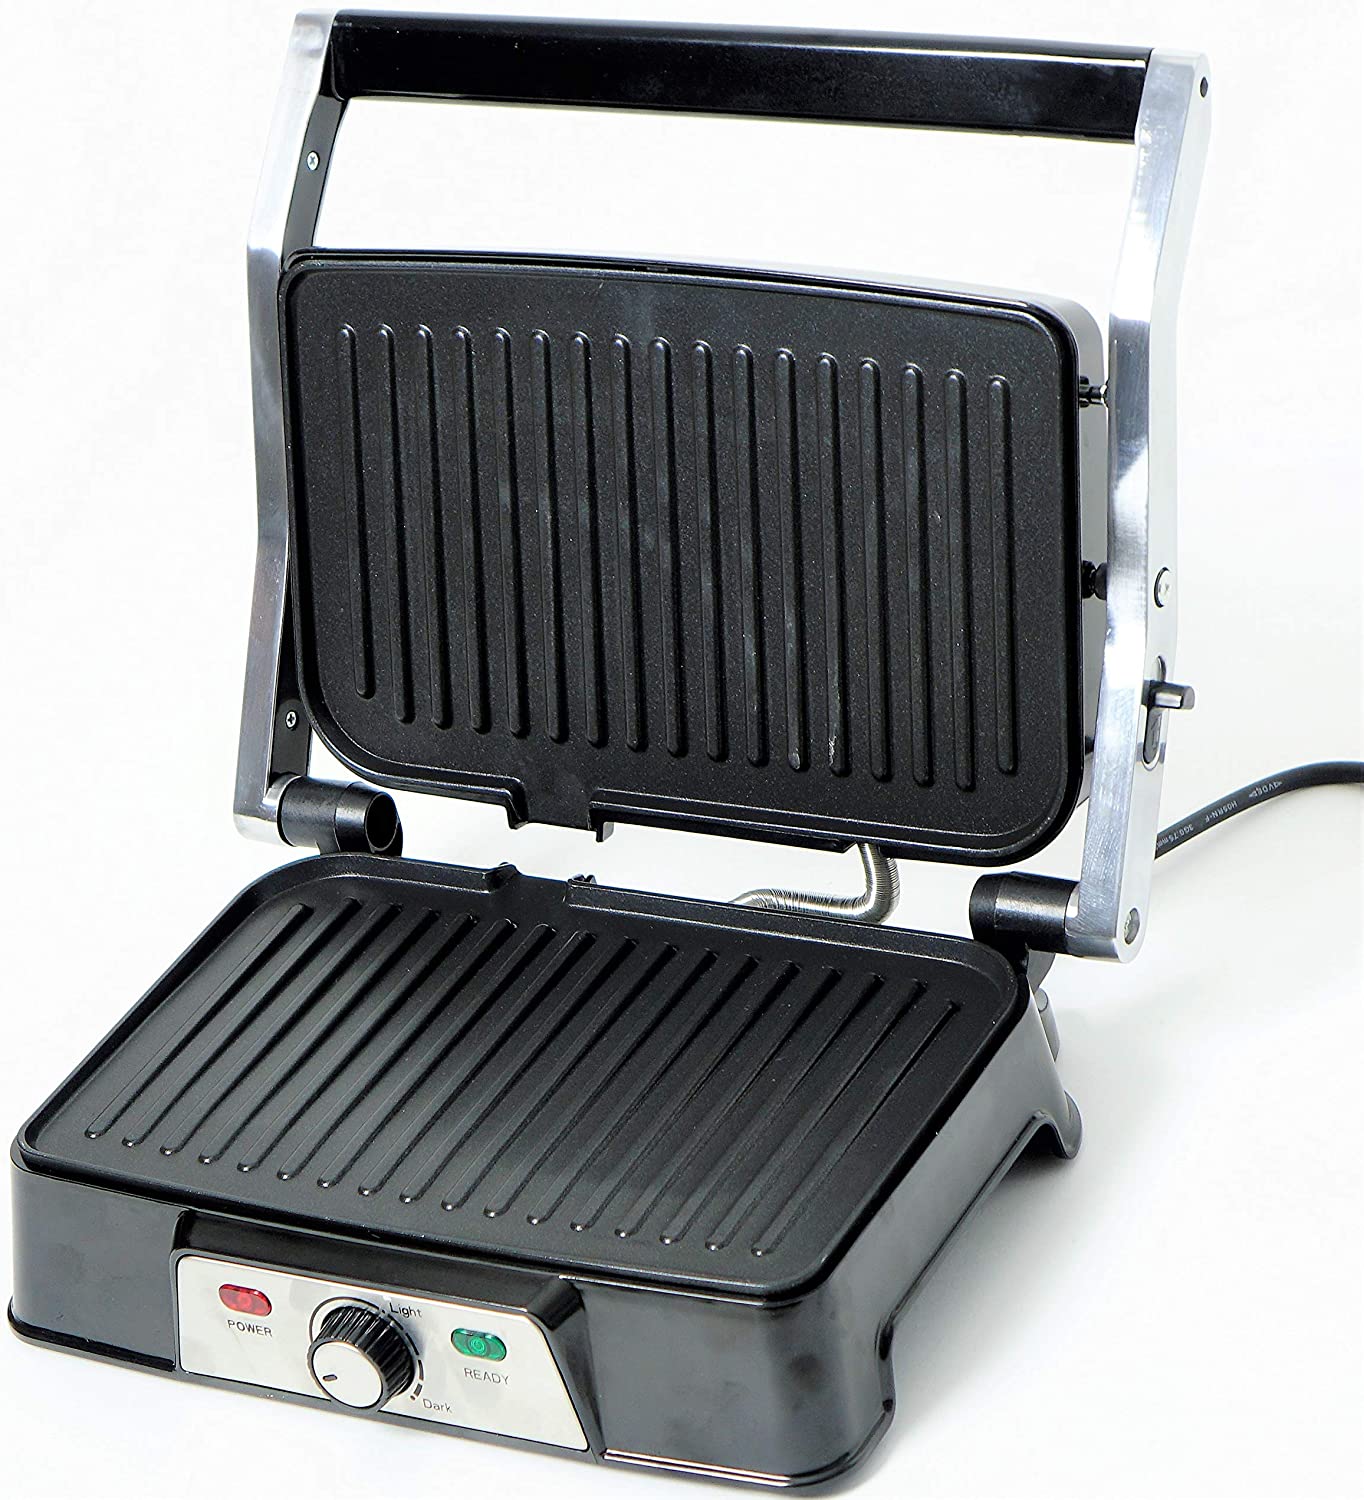 EASY GRILL Easy Electric Grill